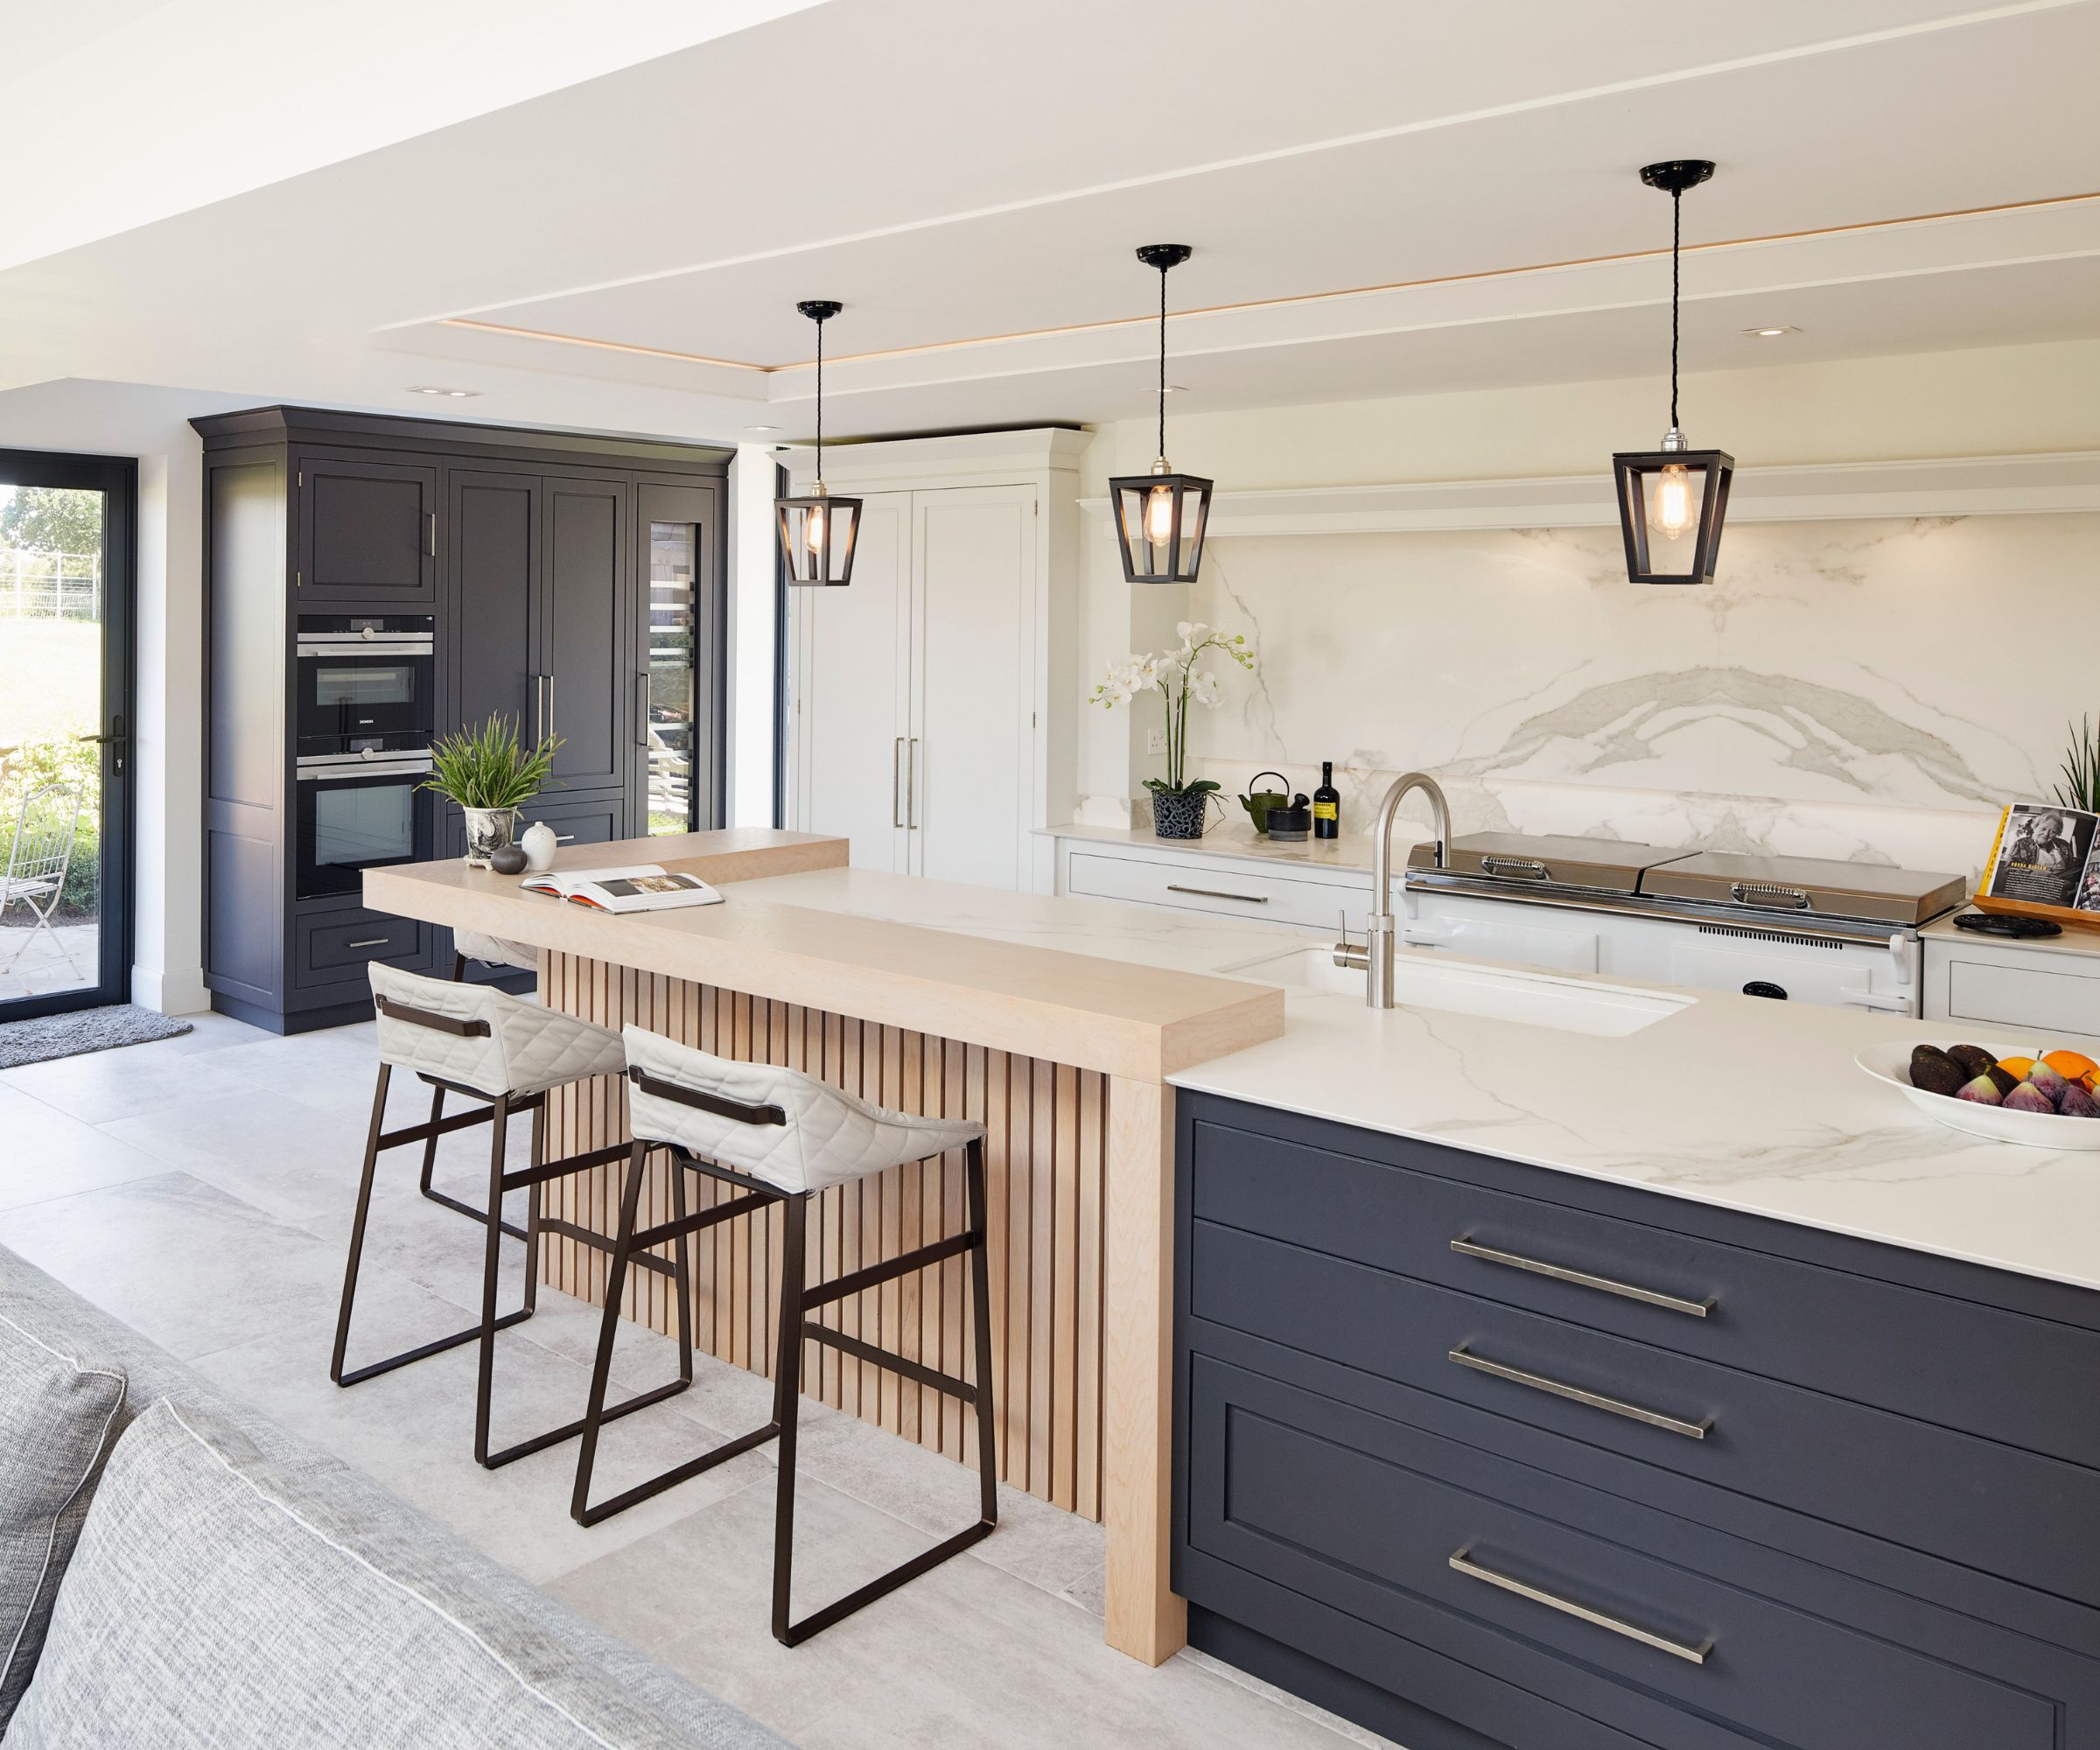 How to design a kitchen island with seating: 6 experts advise